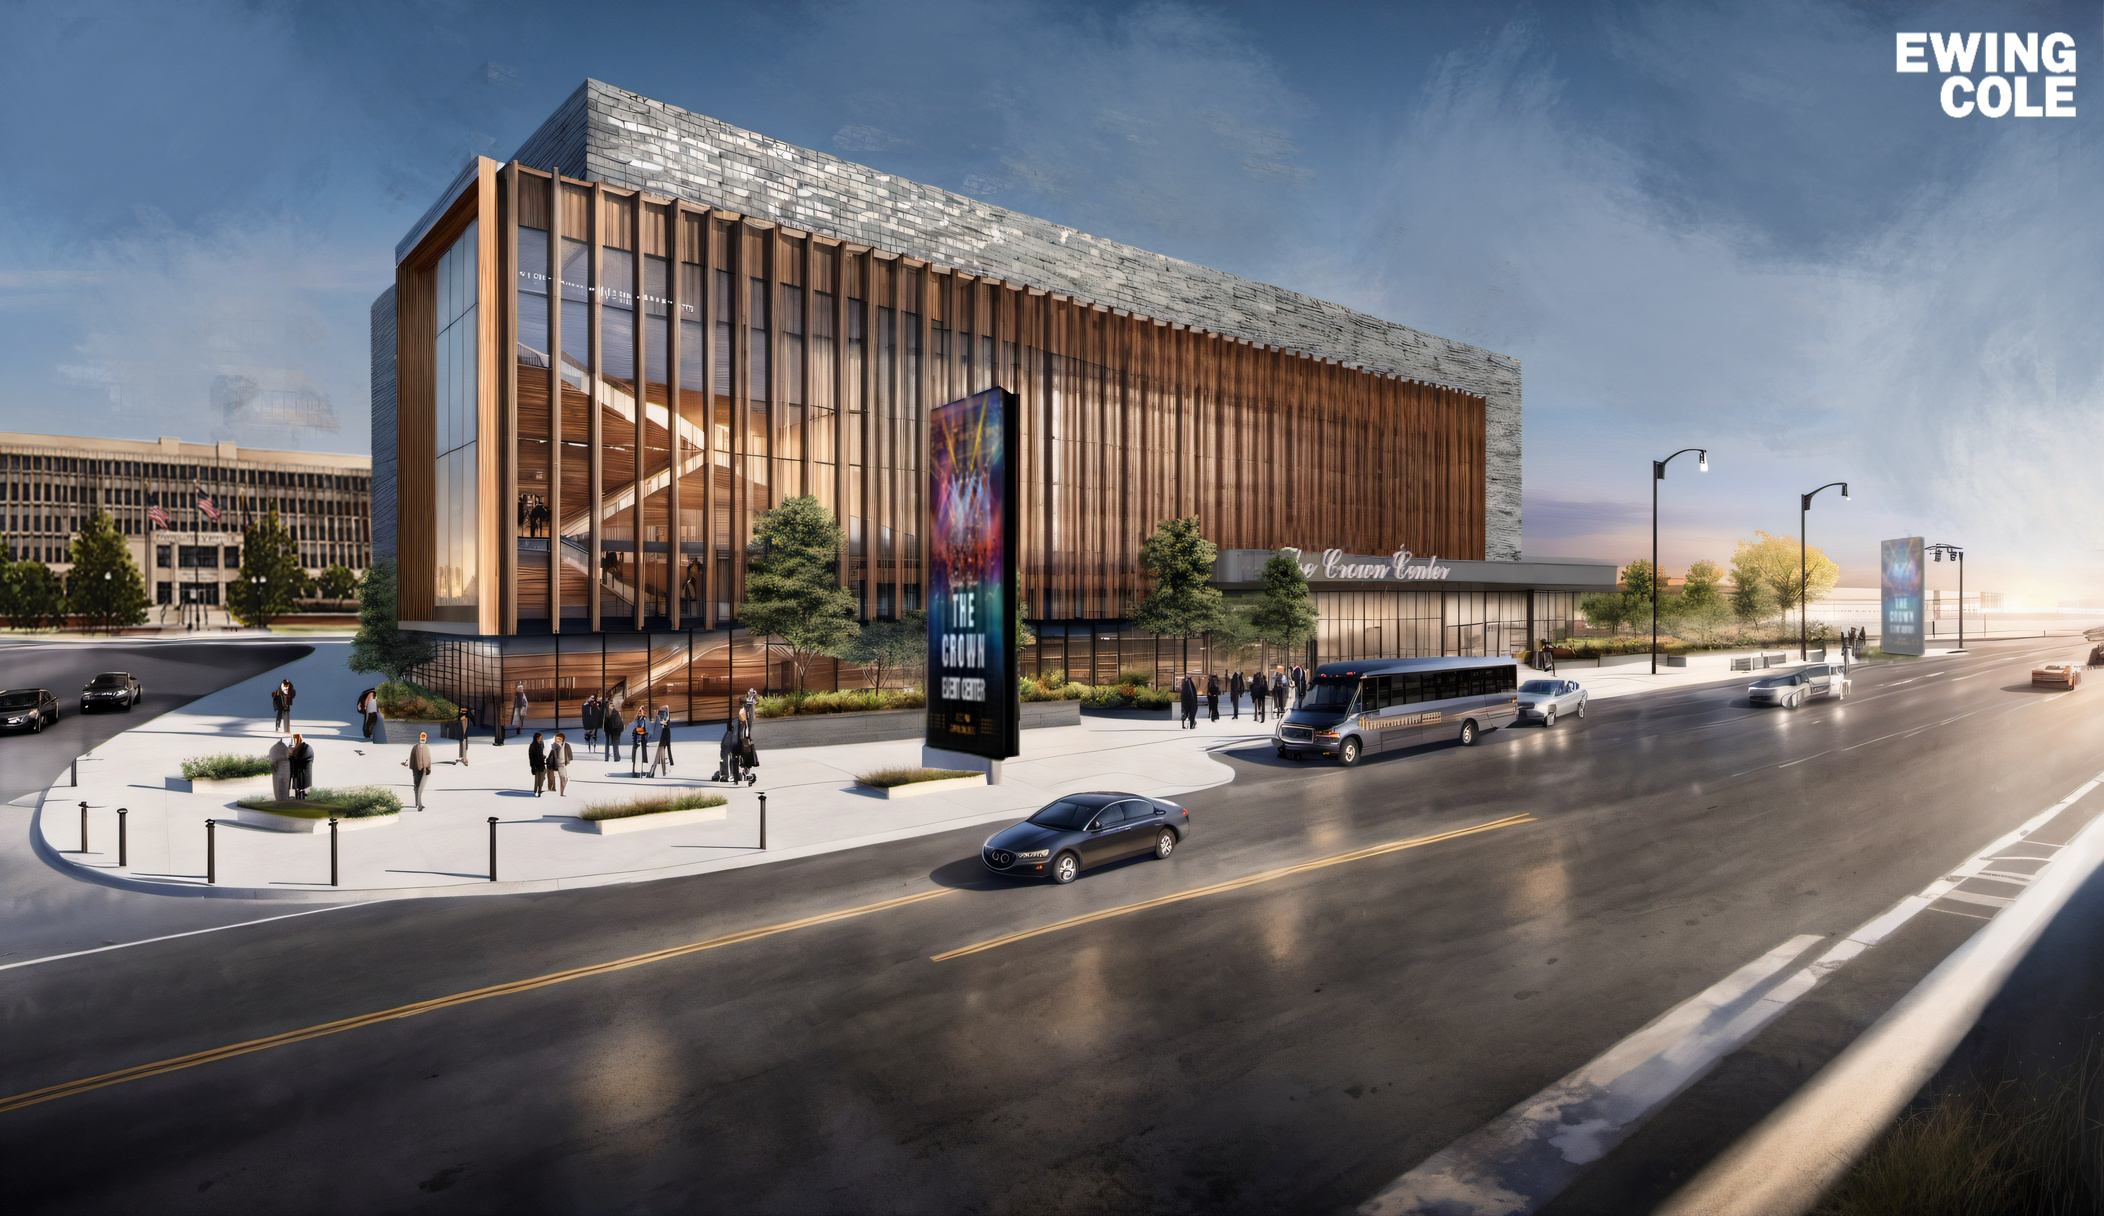 Artist rendering of the new Crown Event Center